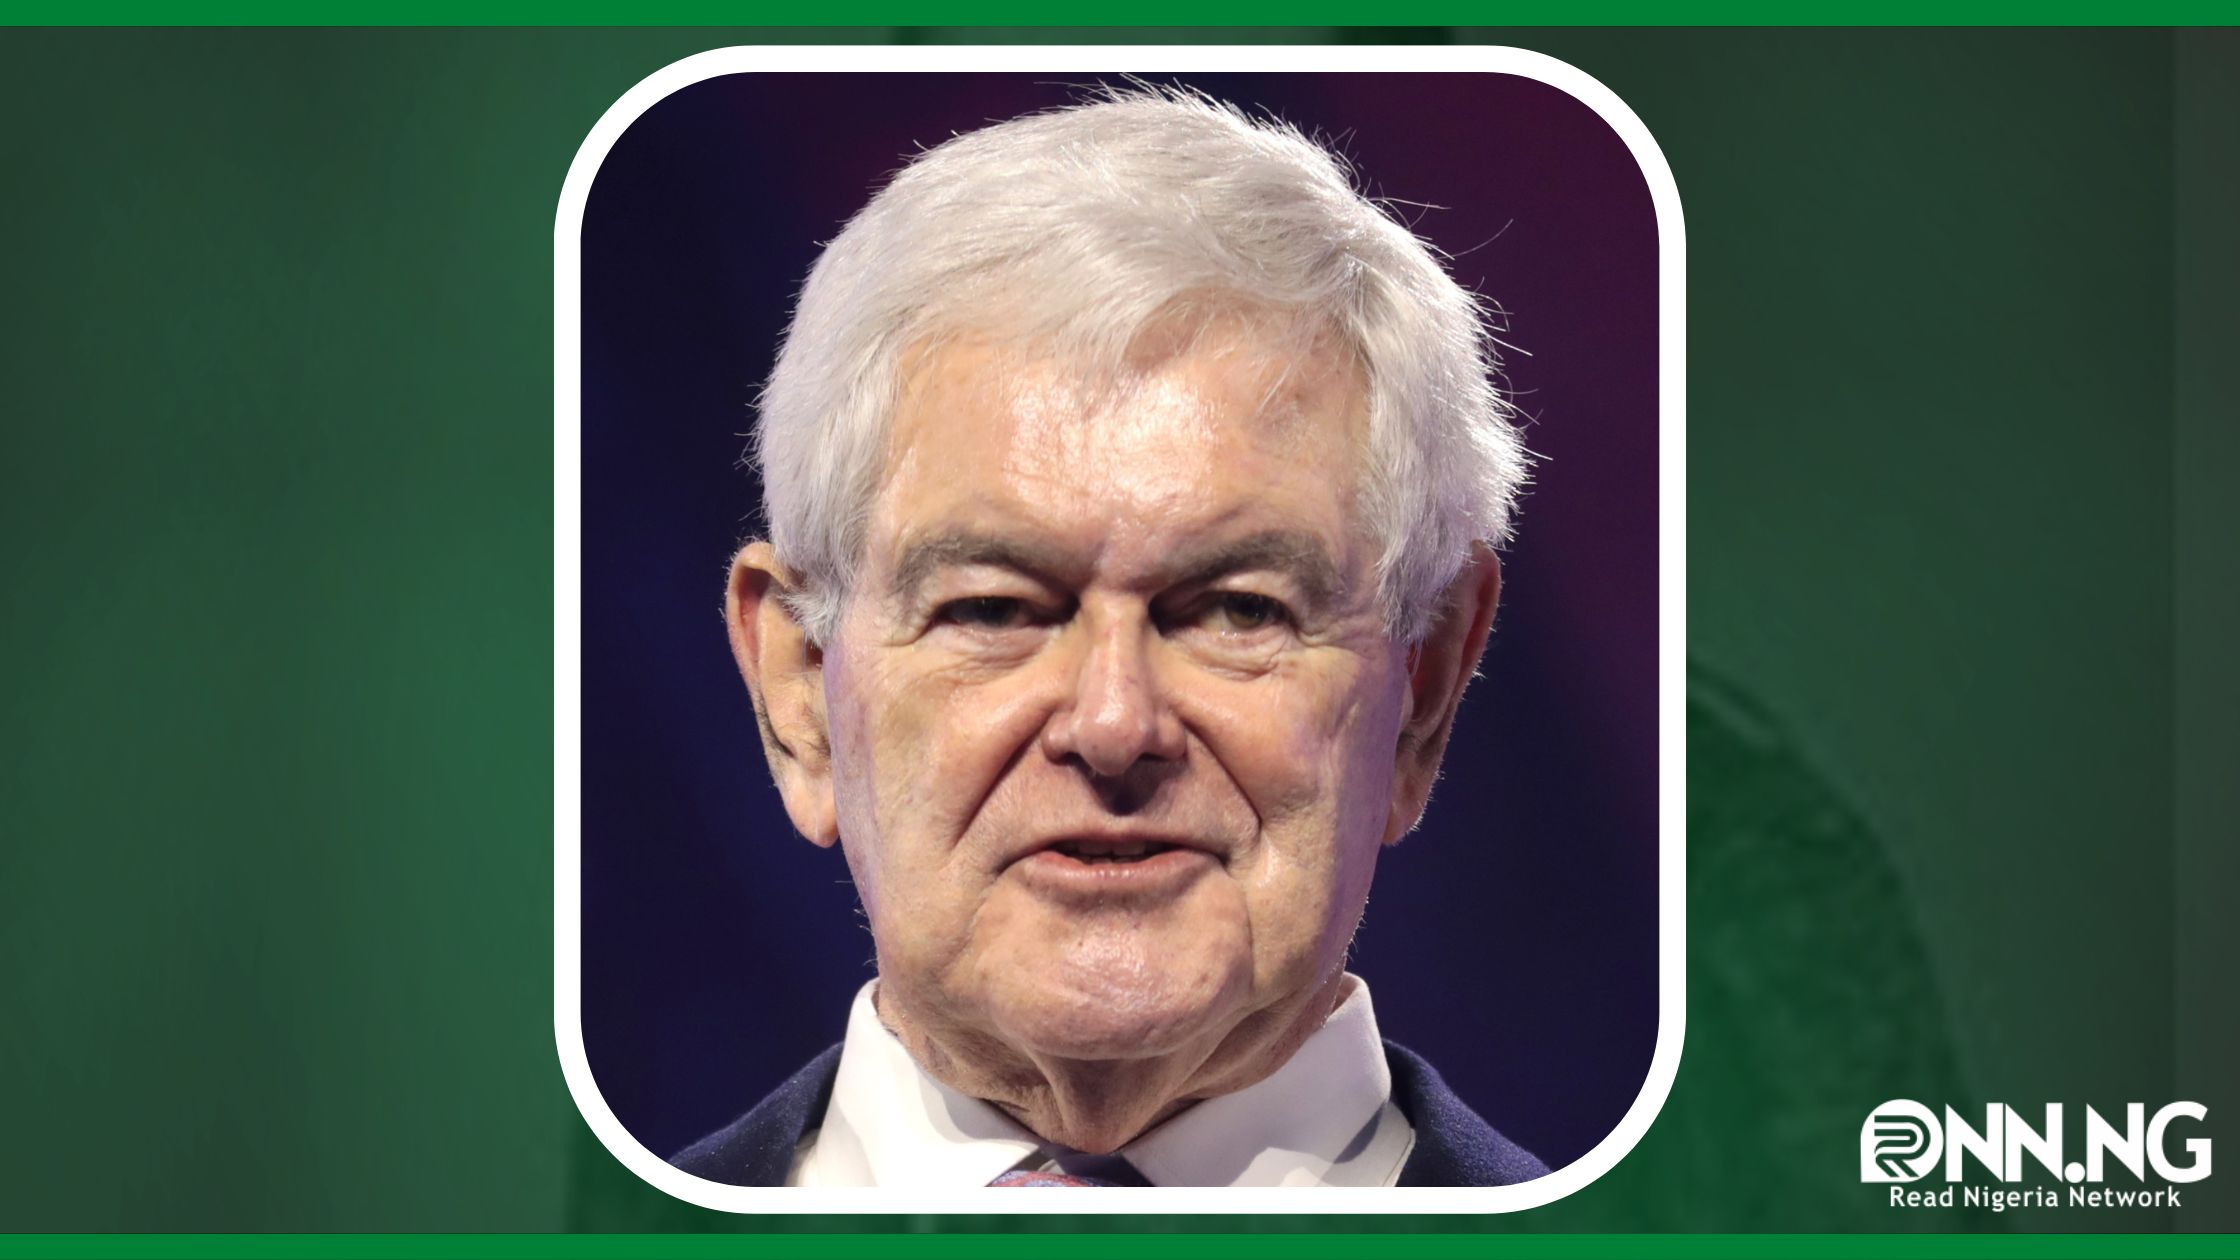 Newt Gingrich Biography And Net Worth